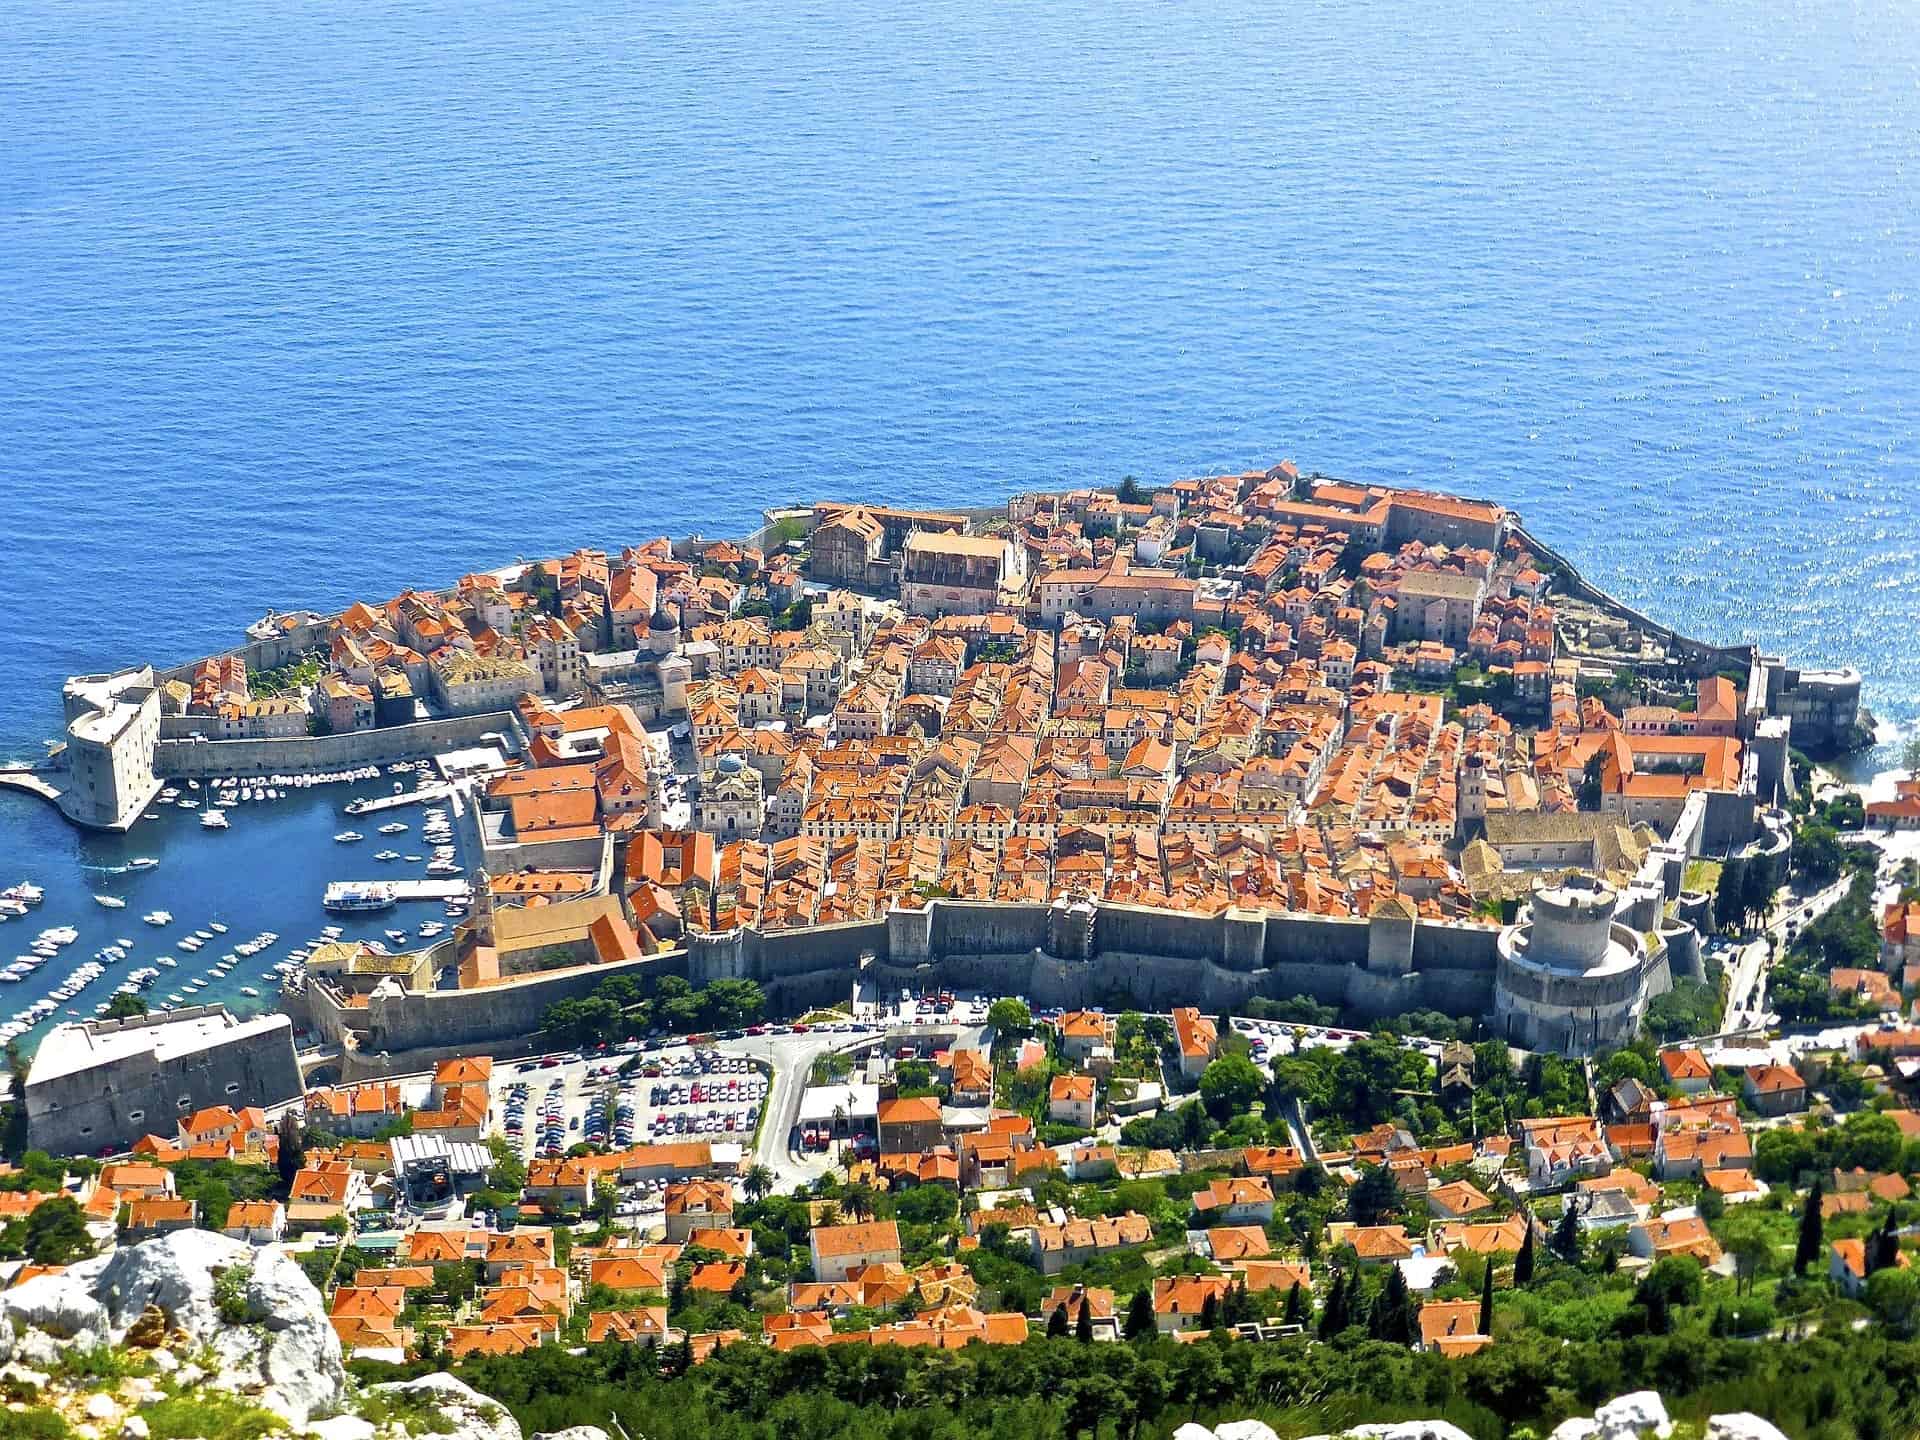 Dubrovnik, Croatia - a must visit place after COVID-19